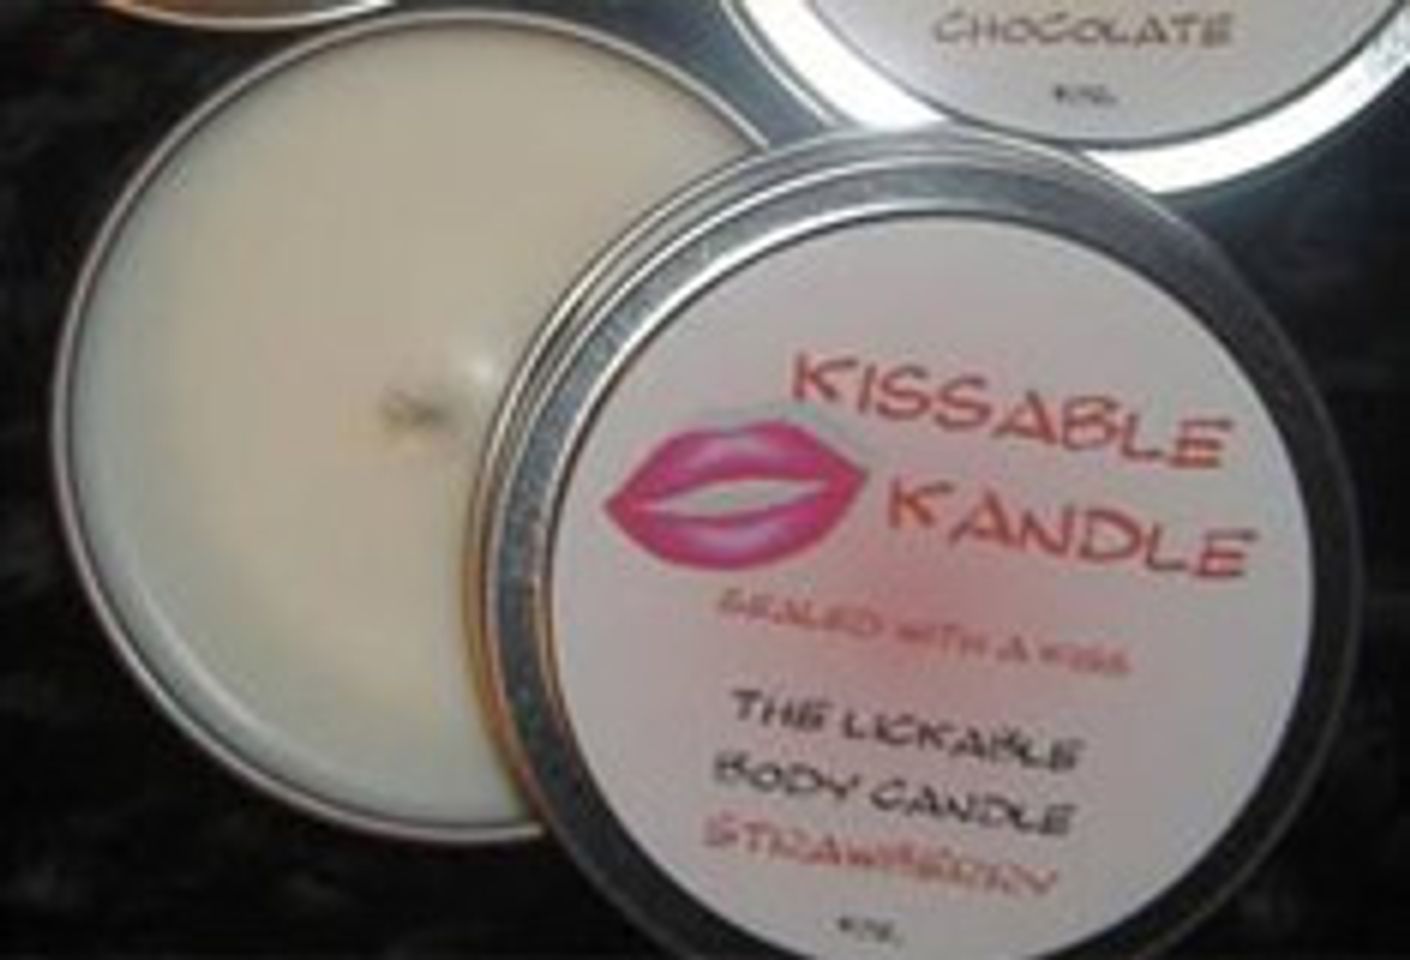 Lickable Candle Unveiled